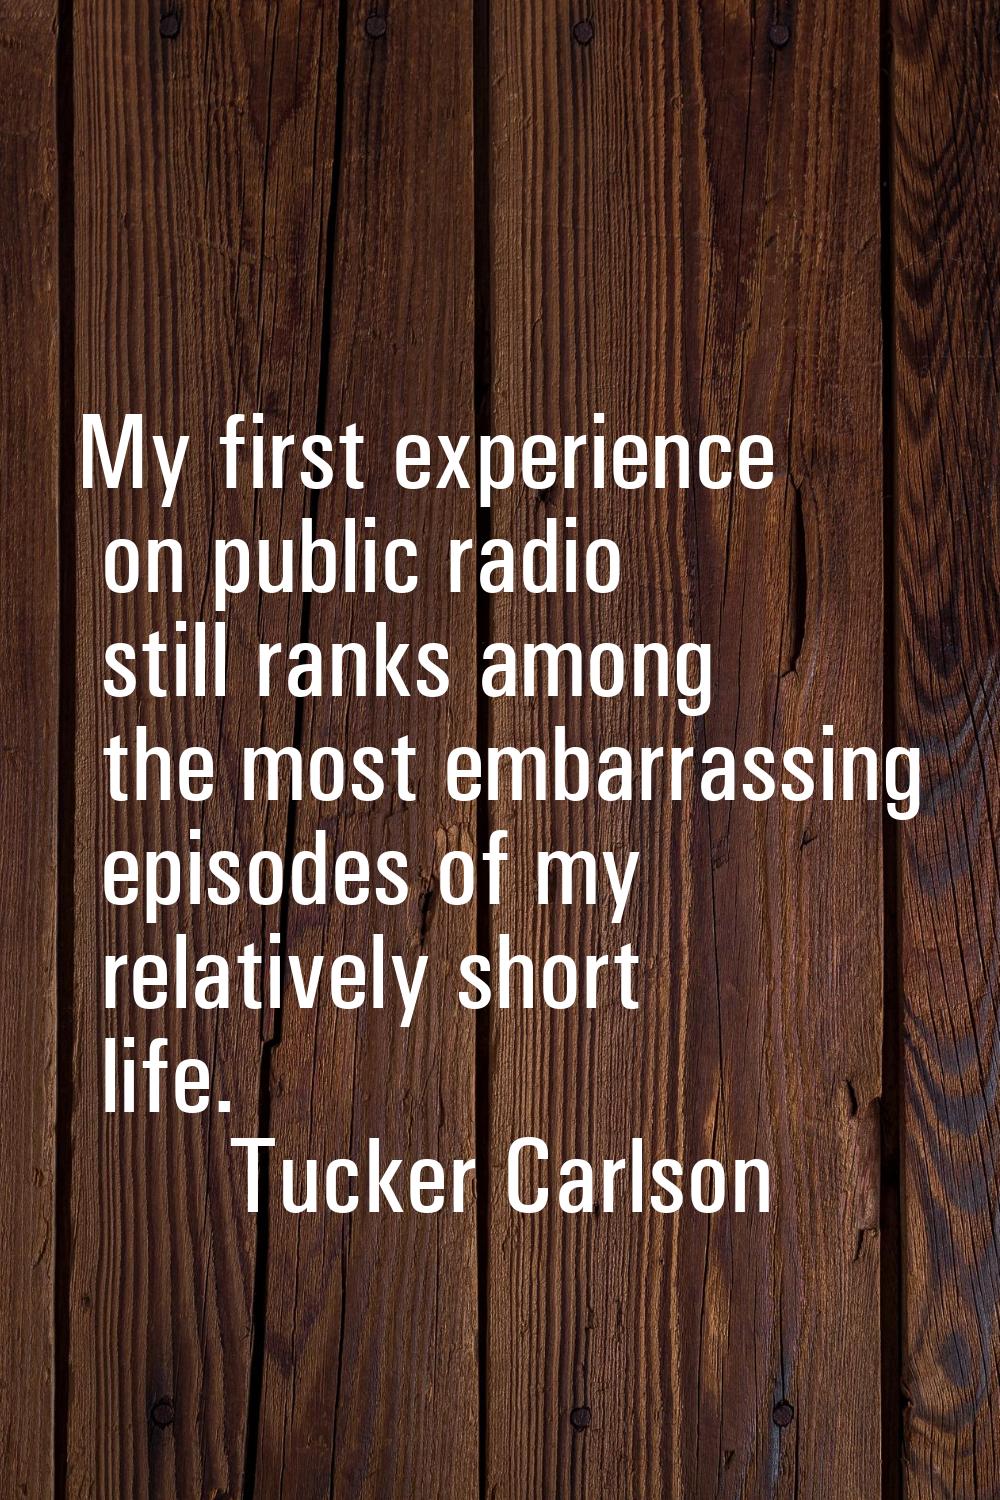 My first experience on public radio still ranks among the most embarrassing episodes of my relative